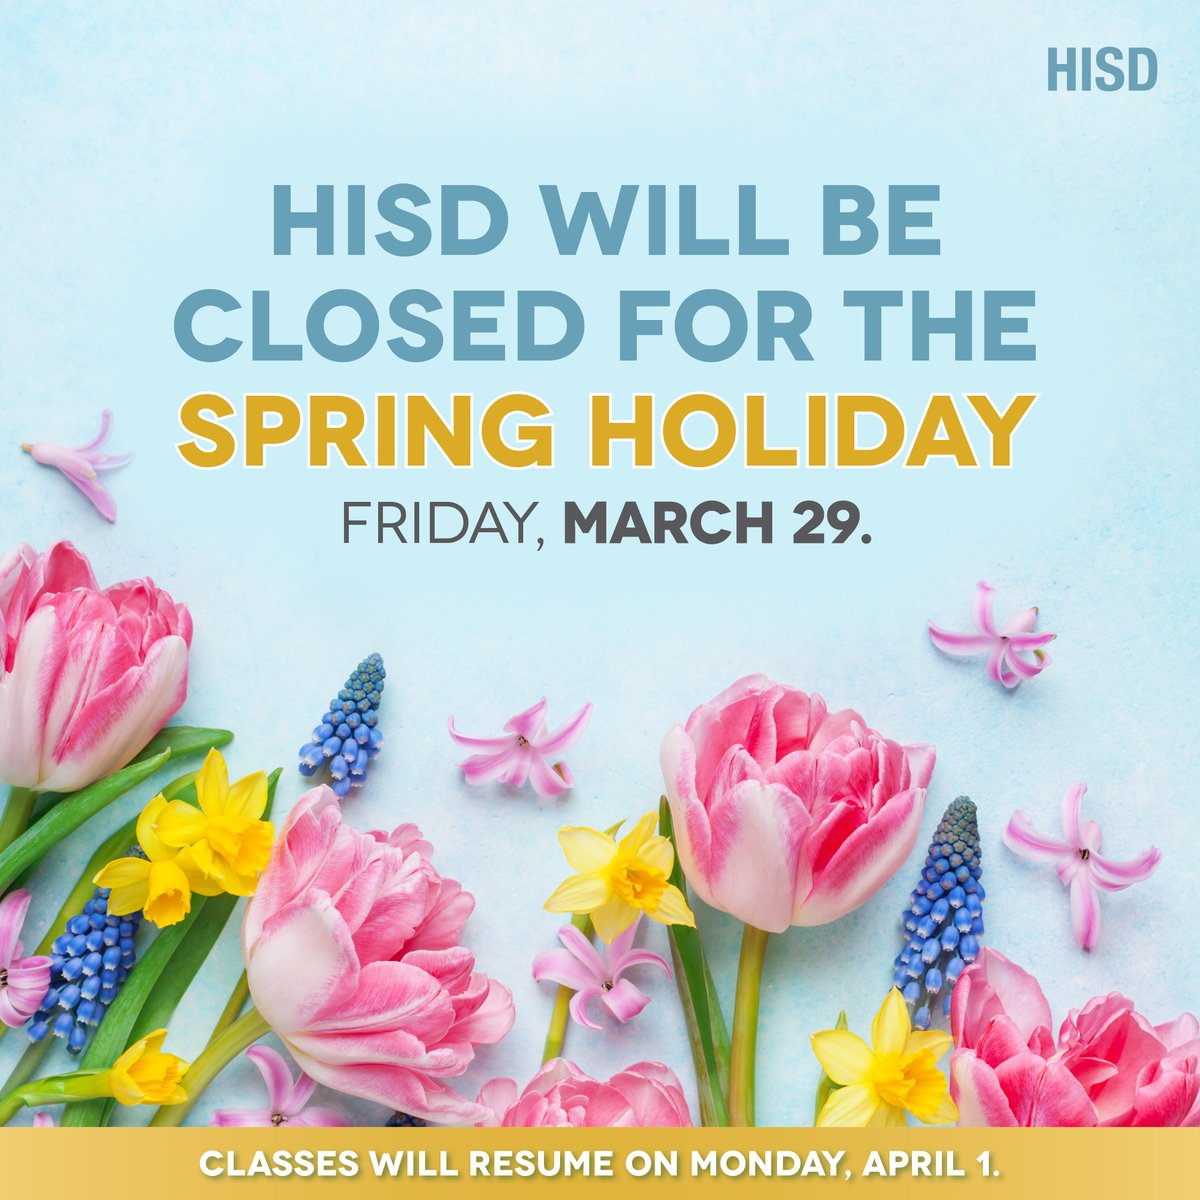 Reminder to our HISD community: The District will be closed on Friday, March 29, for the spring holiday. Students and staff will return on Monday, April 1.